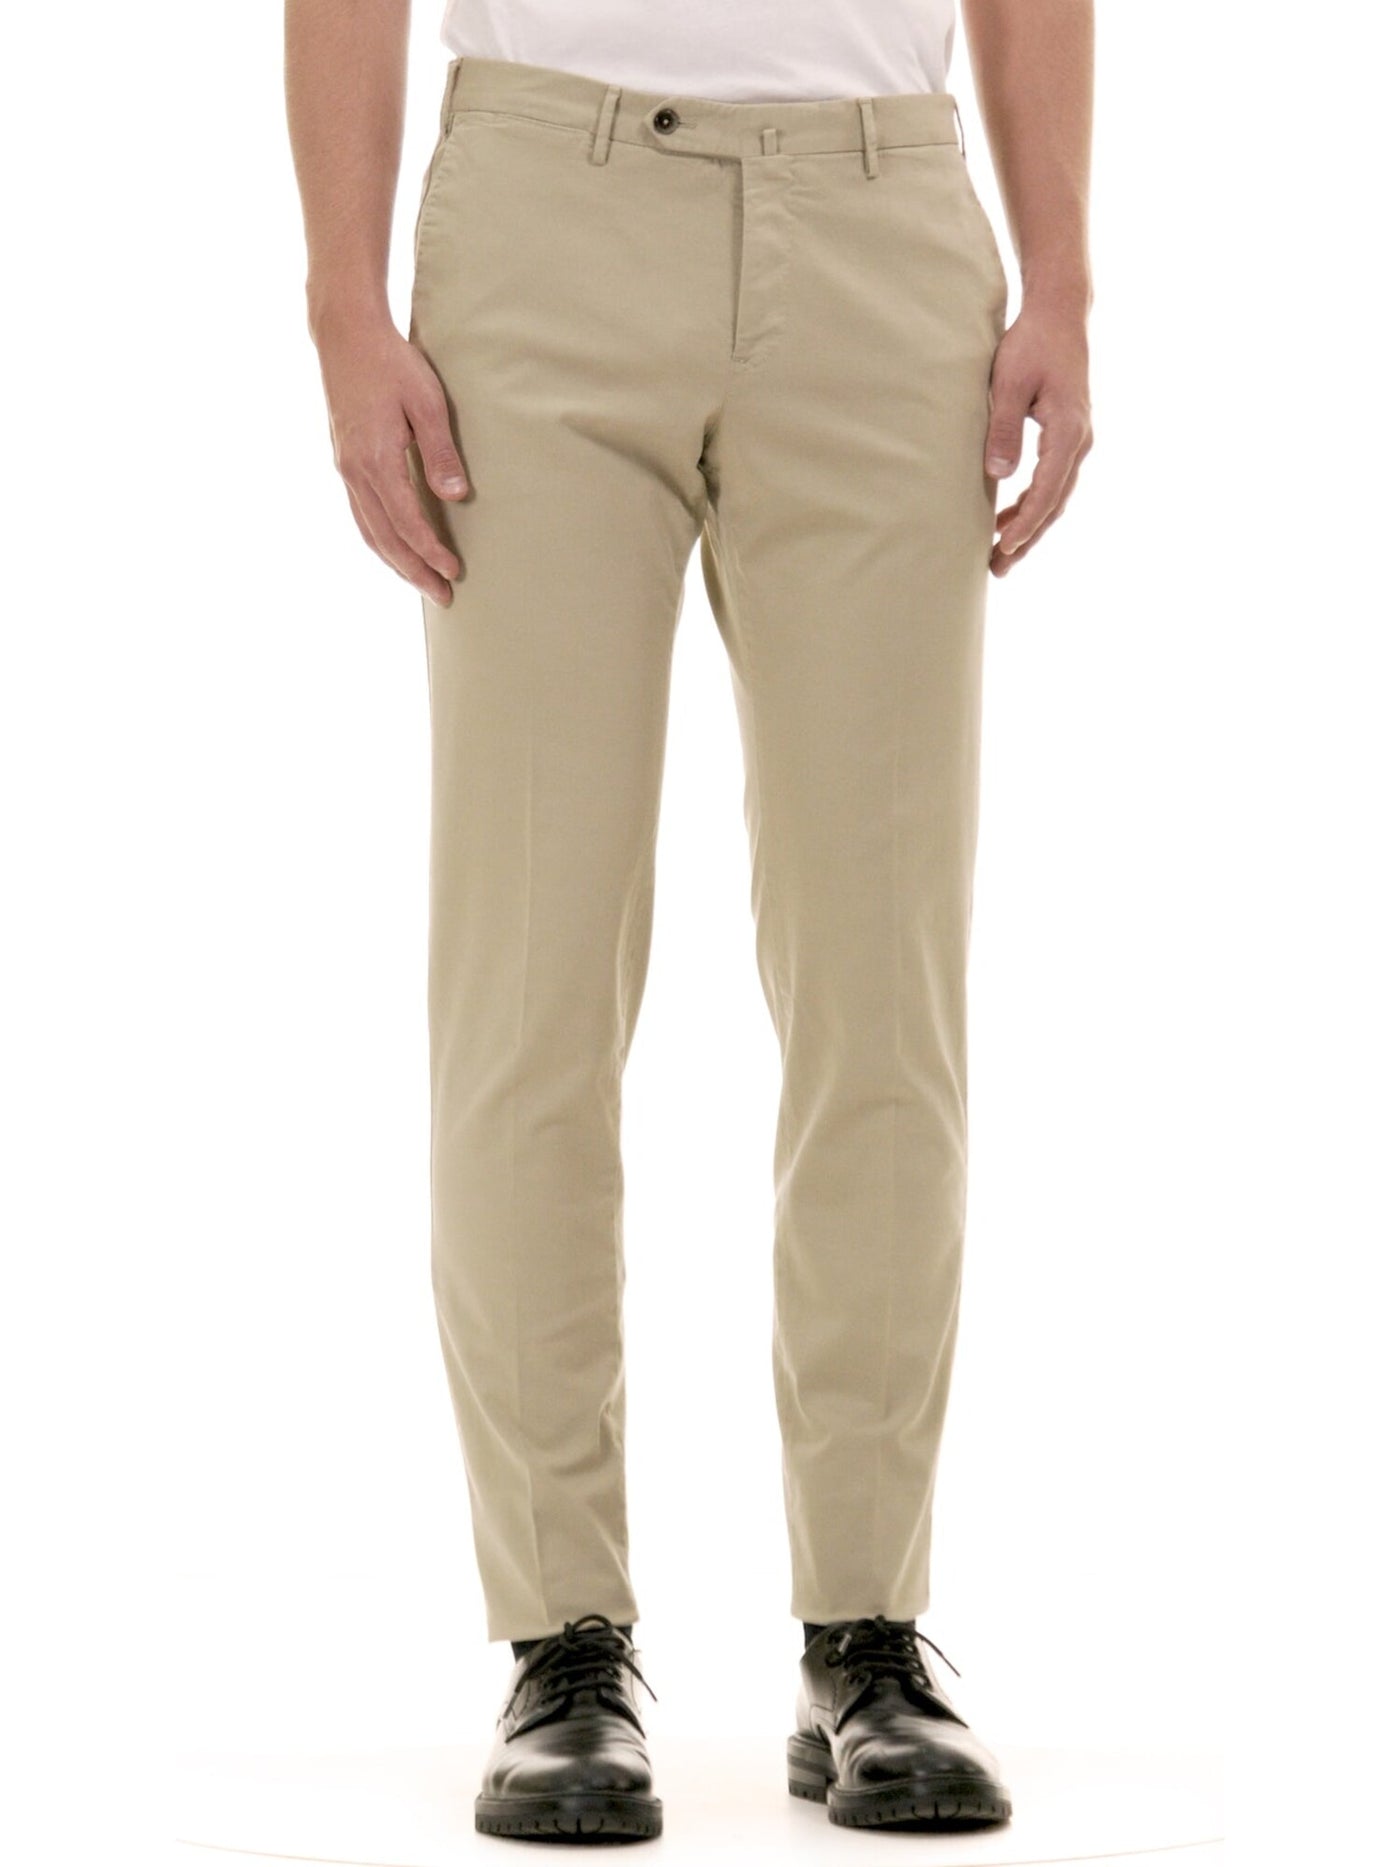 TORIN OPIFICIO Mens Beige Tapered, Slim Fit Cashmere Pants 46